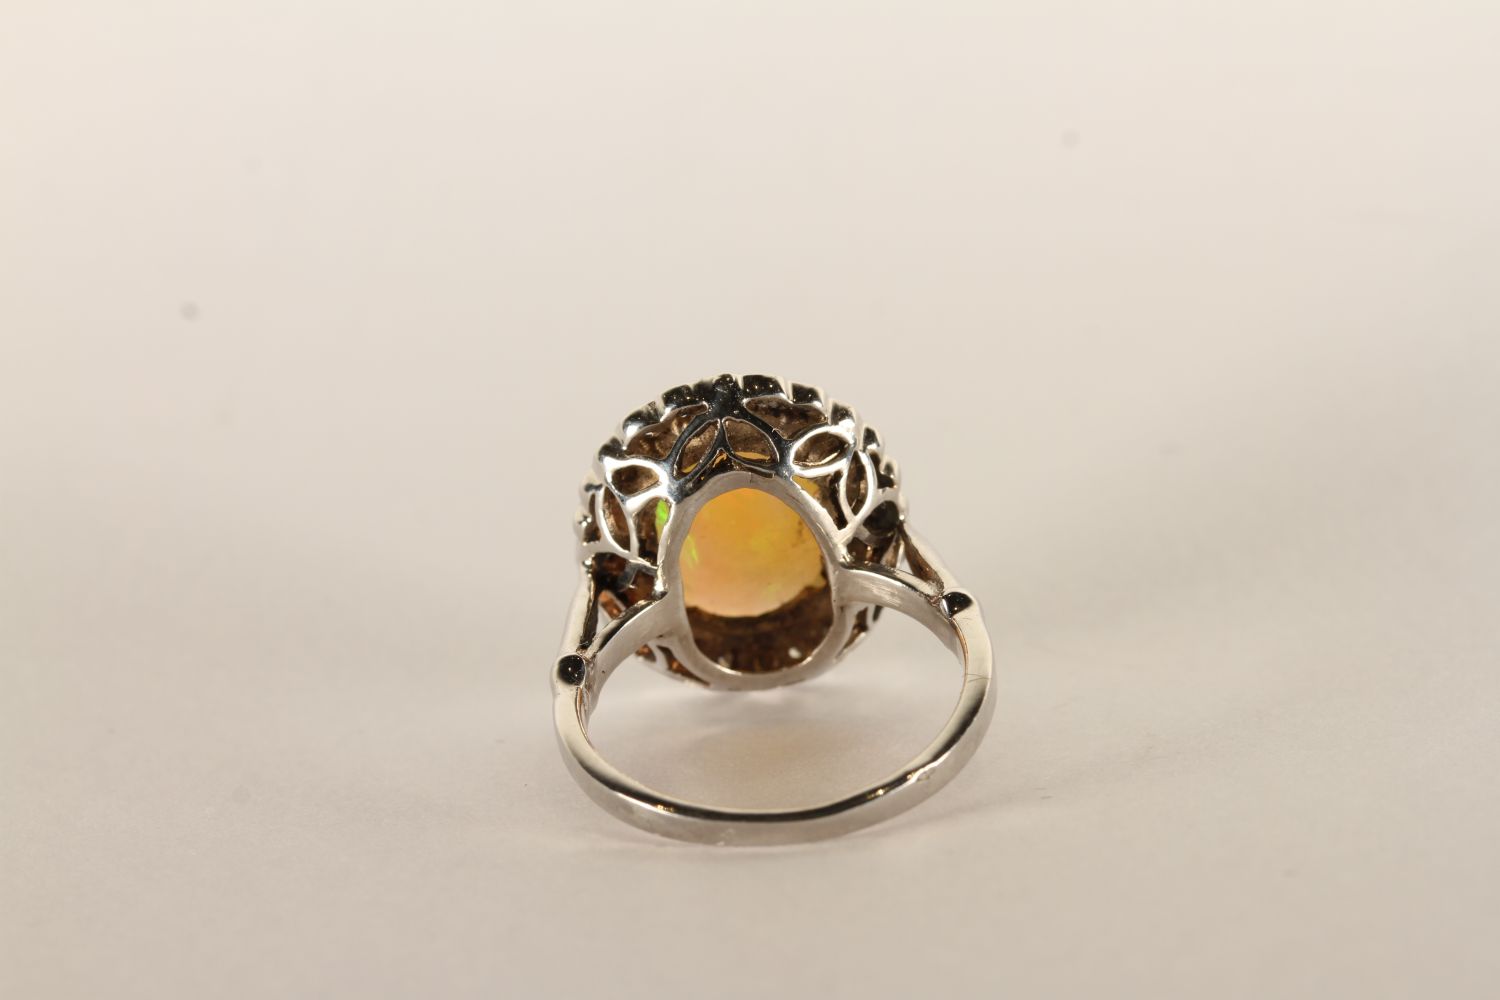 Opal and Diamond Cluster Ring, Cabochon Opal, 12.5x10mm, diamond surround, in 18ct white gold - Image 3 of 3